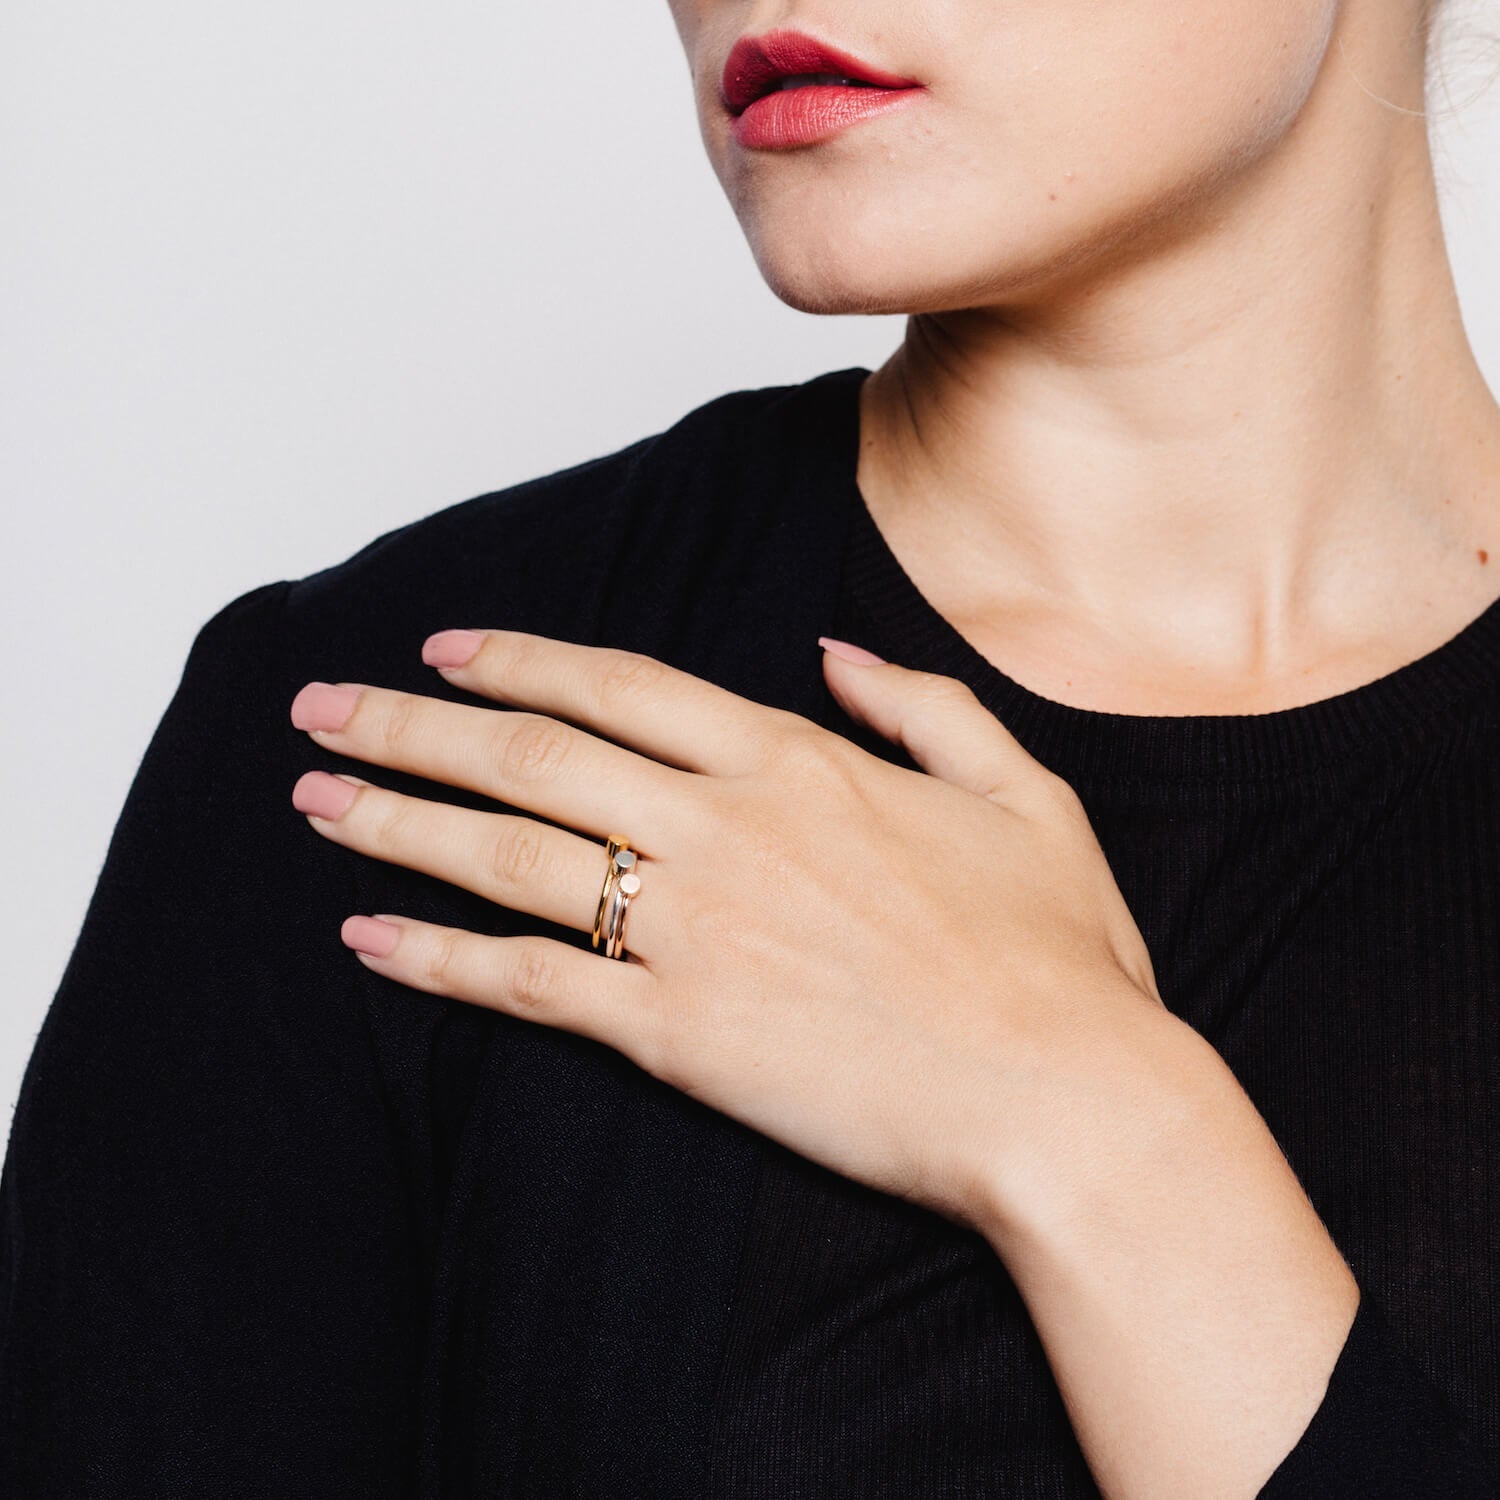 Model wearing three stacked Matthew Calvin dot rings, in silver, gold and rose gold